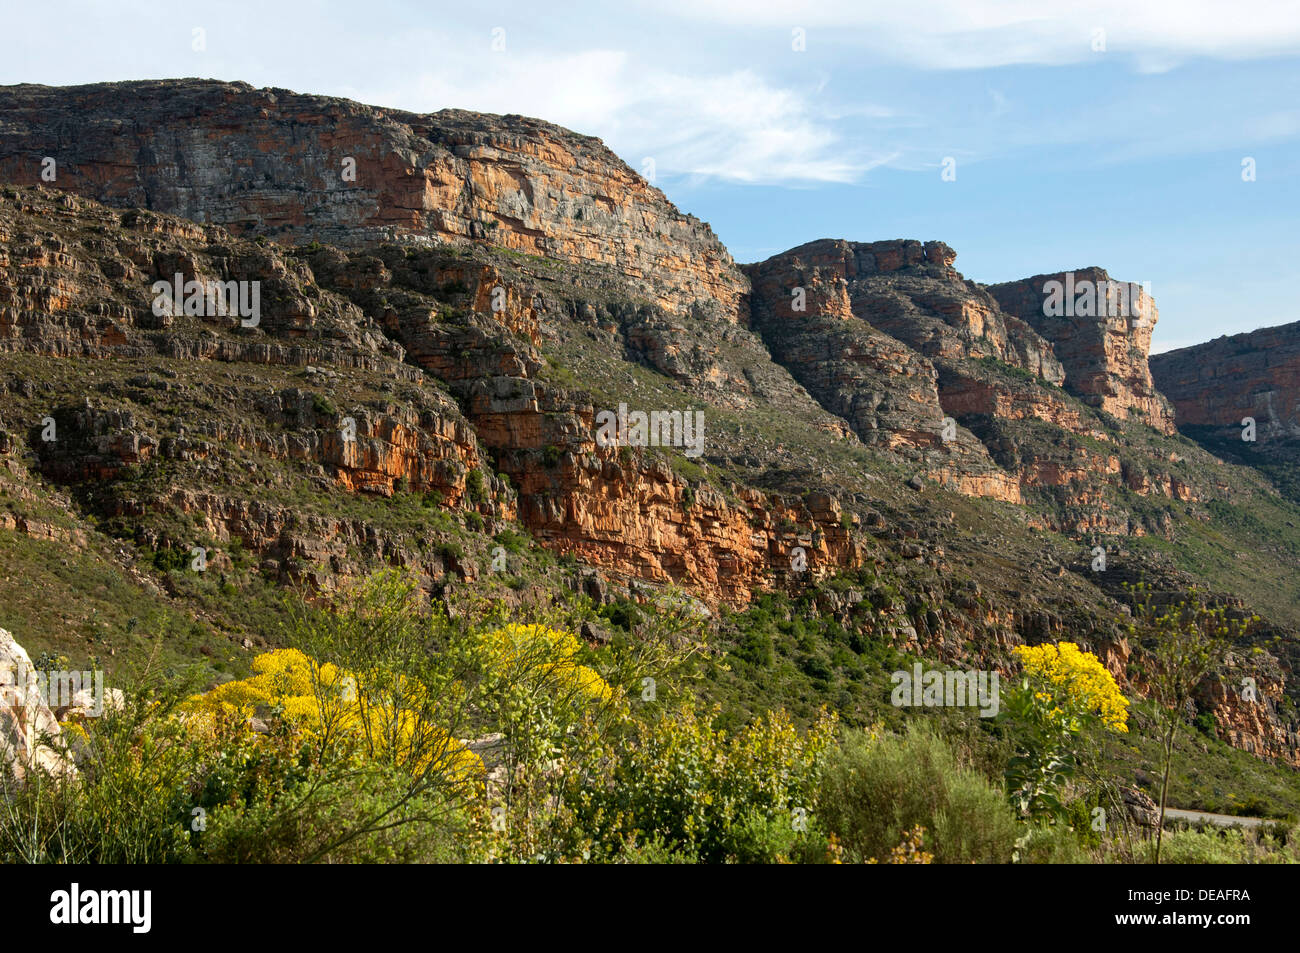 Weathered rock scenery in the Cederberg mountains in Clanwilliam, Cederberg Wilderness Area, Western Cape, South Africa, Africa Stock Photo